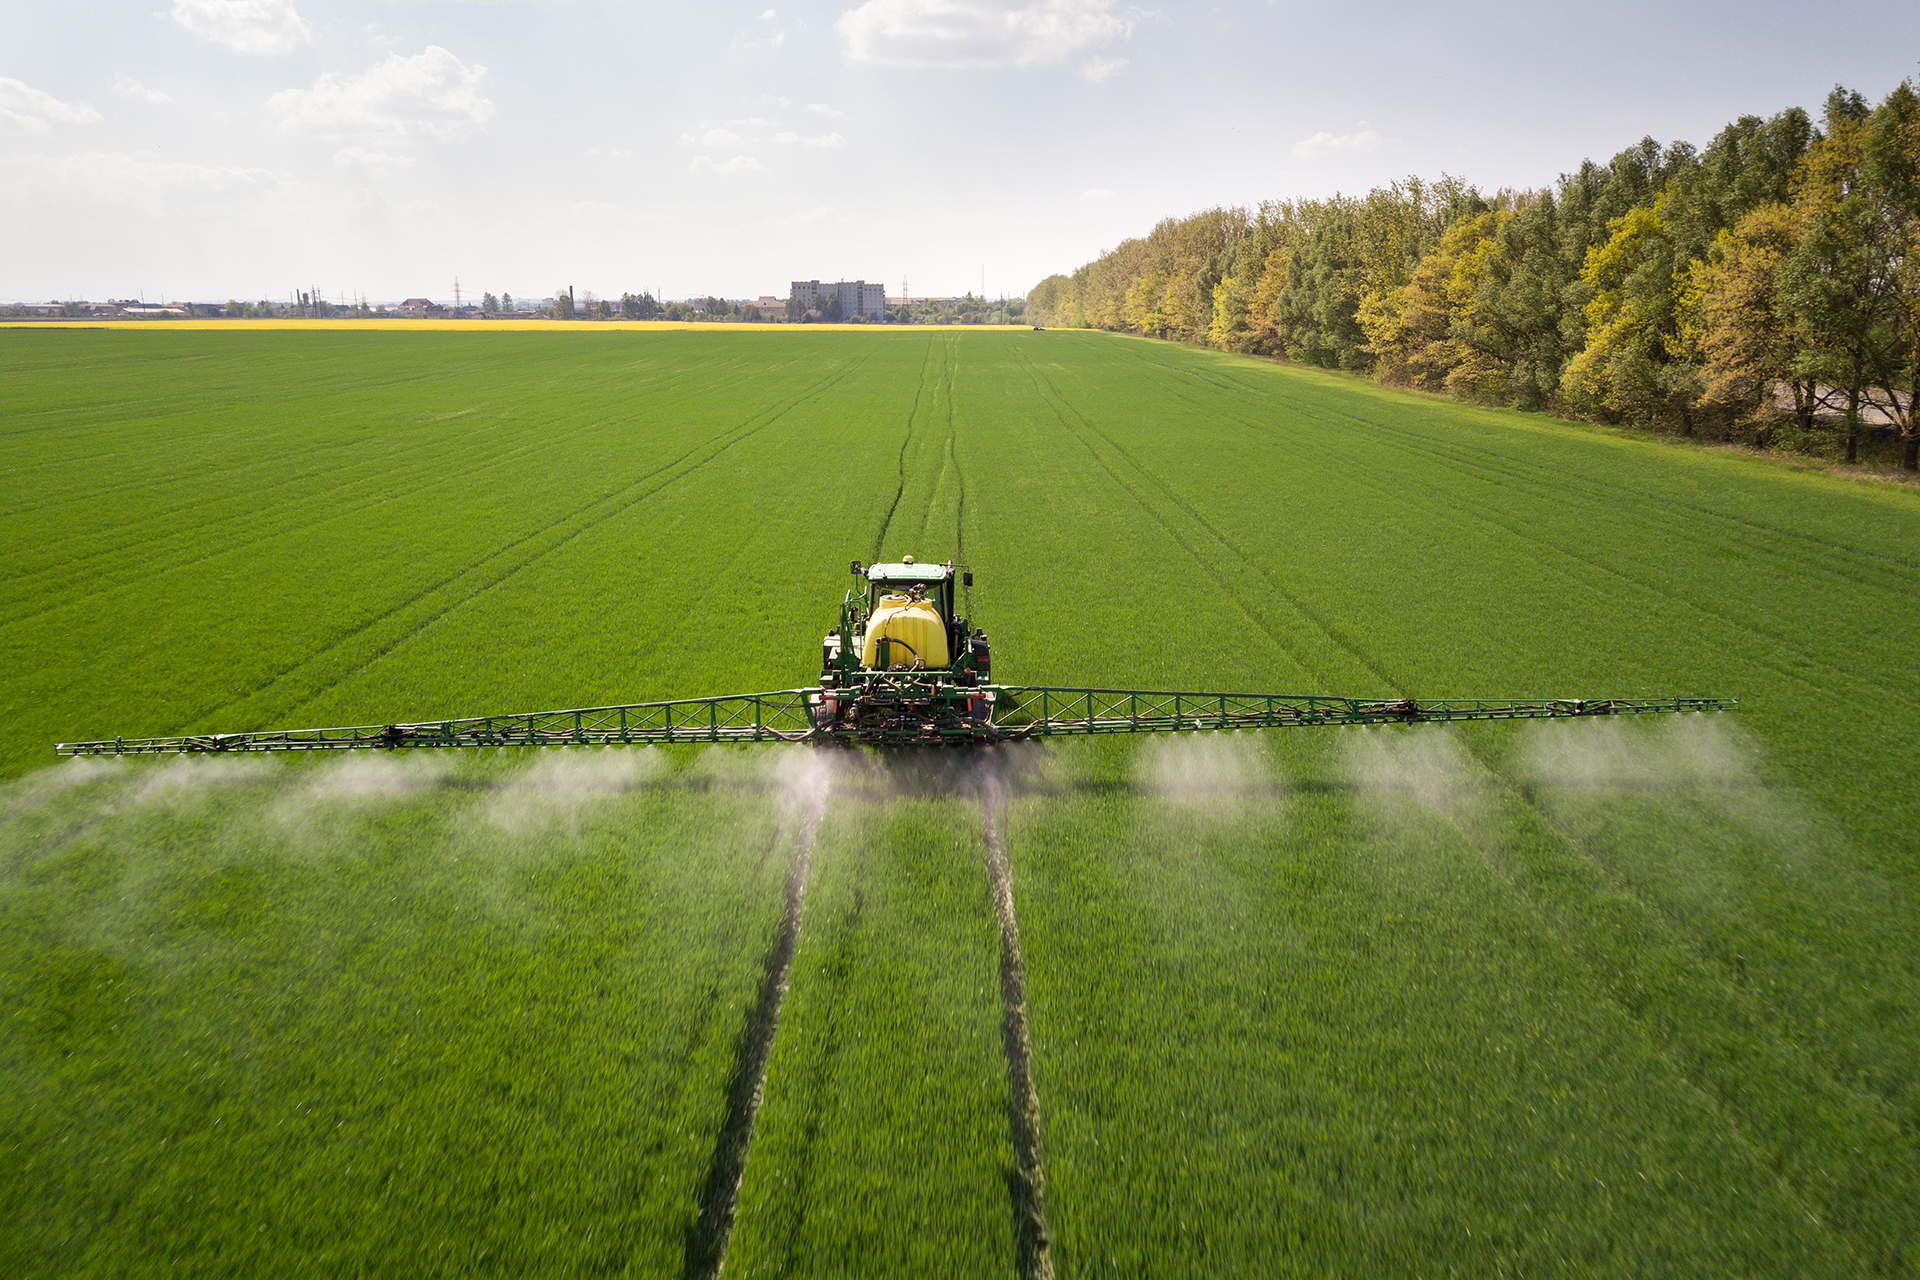 tractor-spraying-pesticides-with-sprayer-large-green-agricultural-field_1.jpg